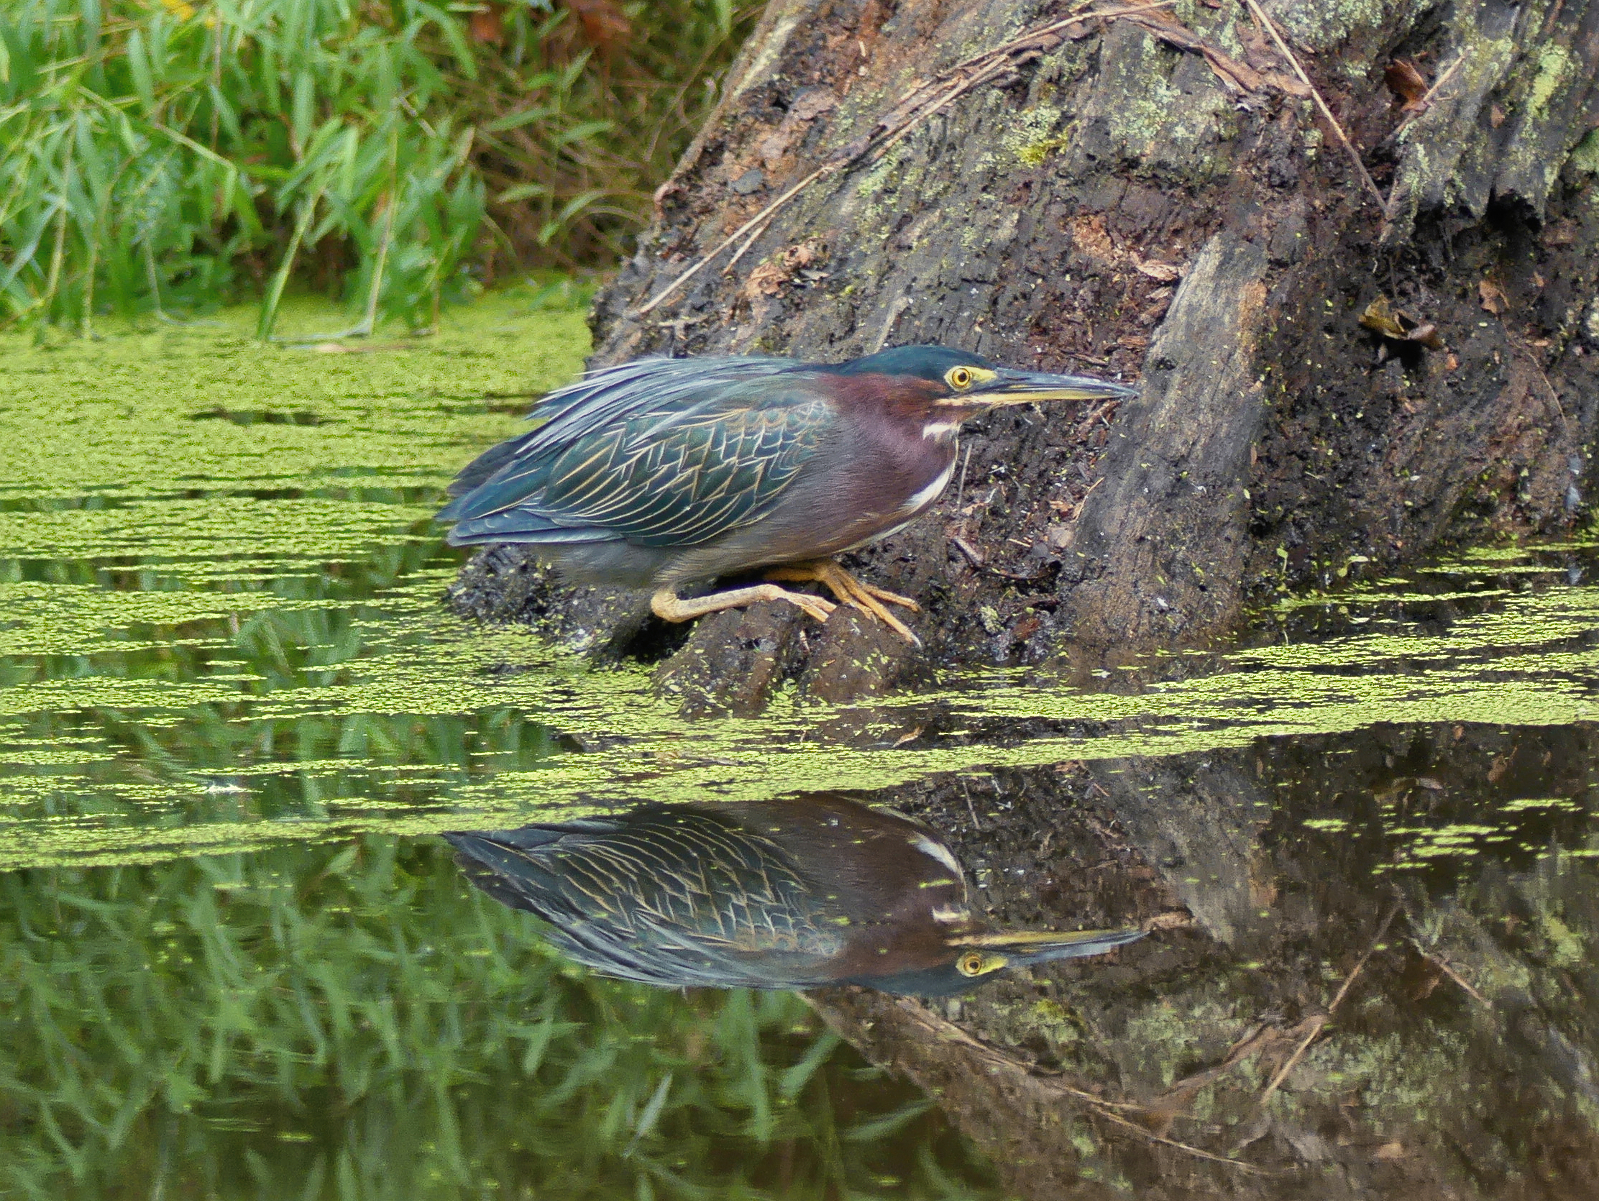 Green Heron resting in a crouched position with legs folded beneath itself on a felled tree protruding from the C and O canal.. Its reflection can be clearly seen in the water through the gap in the duckweed.